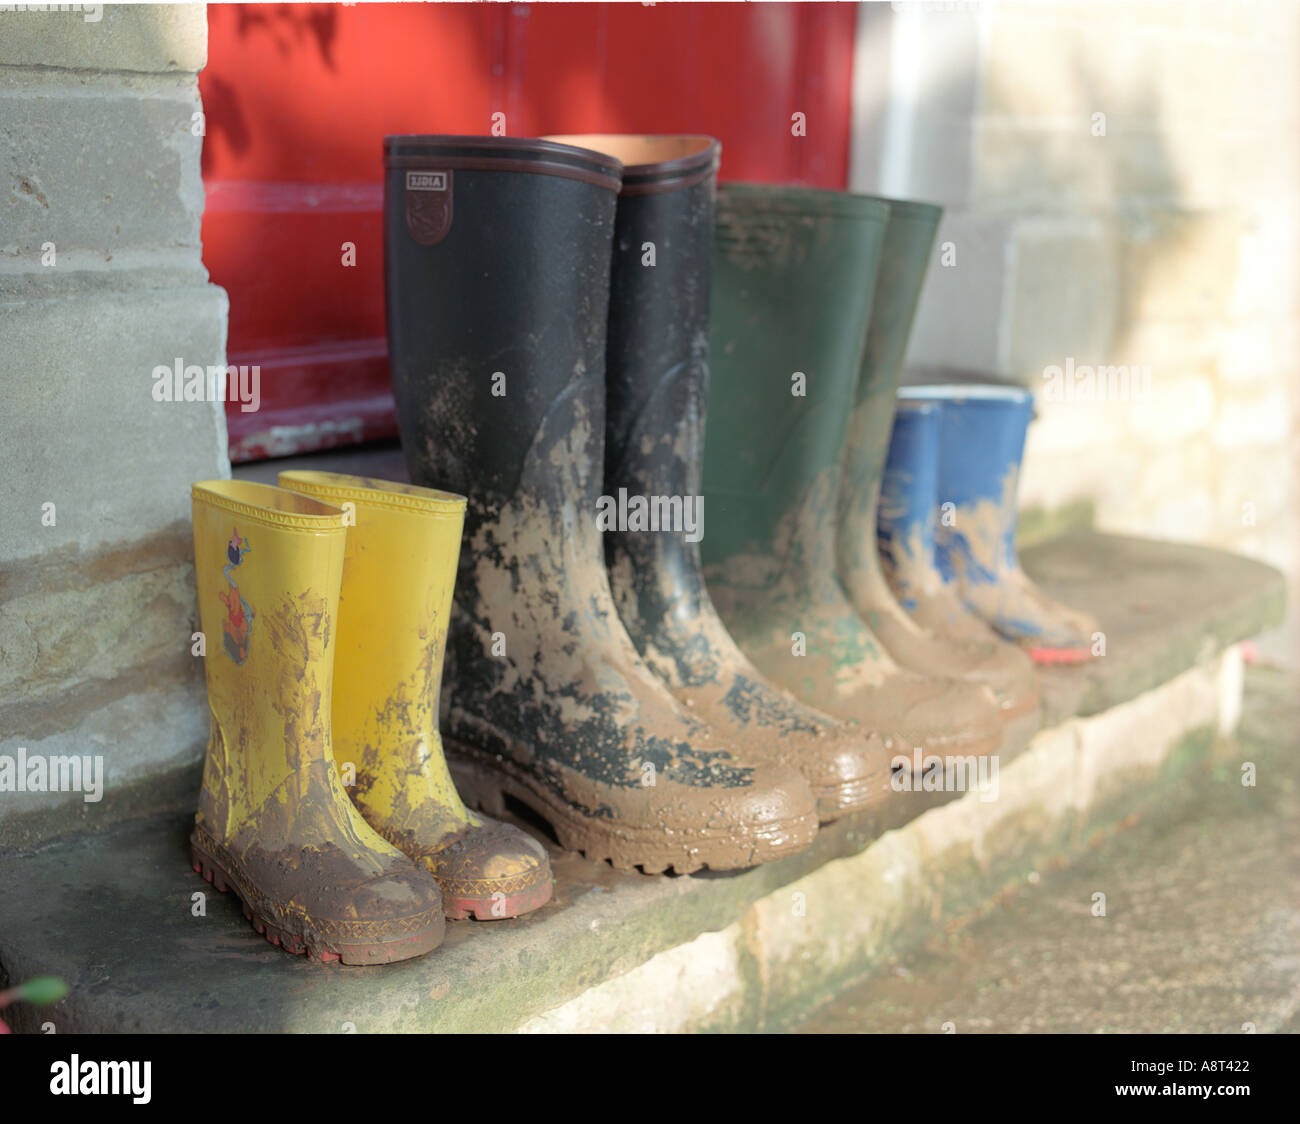 Healthy family concepts of colorful wellington boots on the home ...